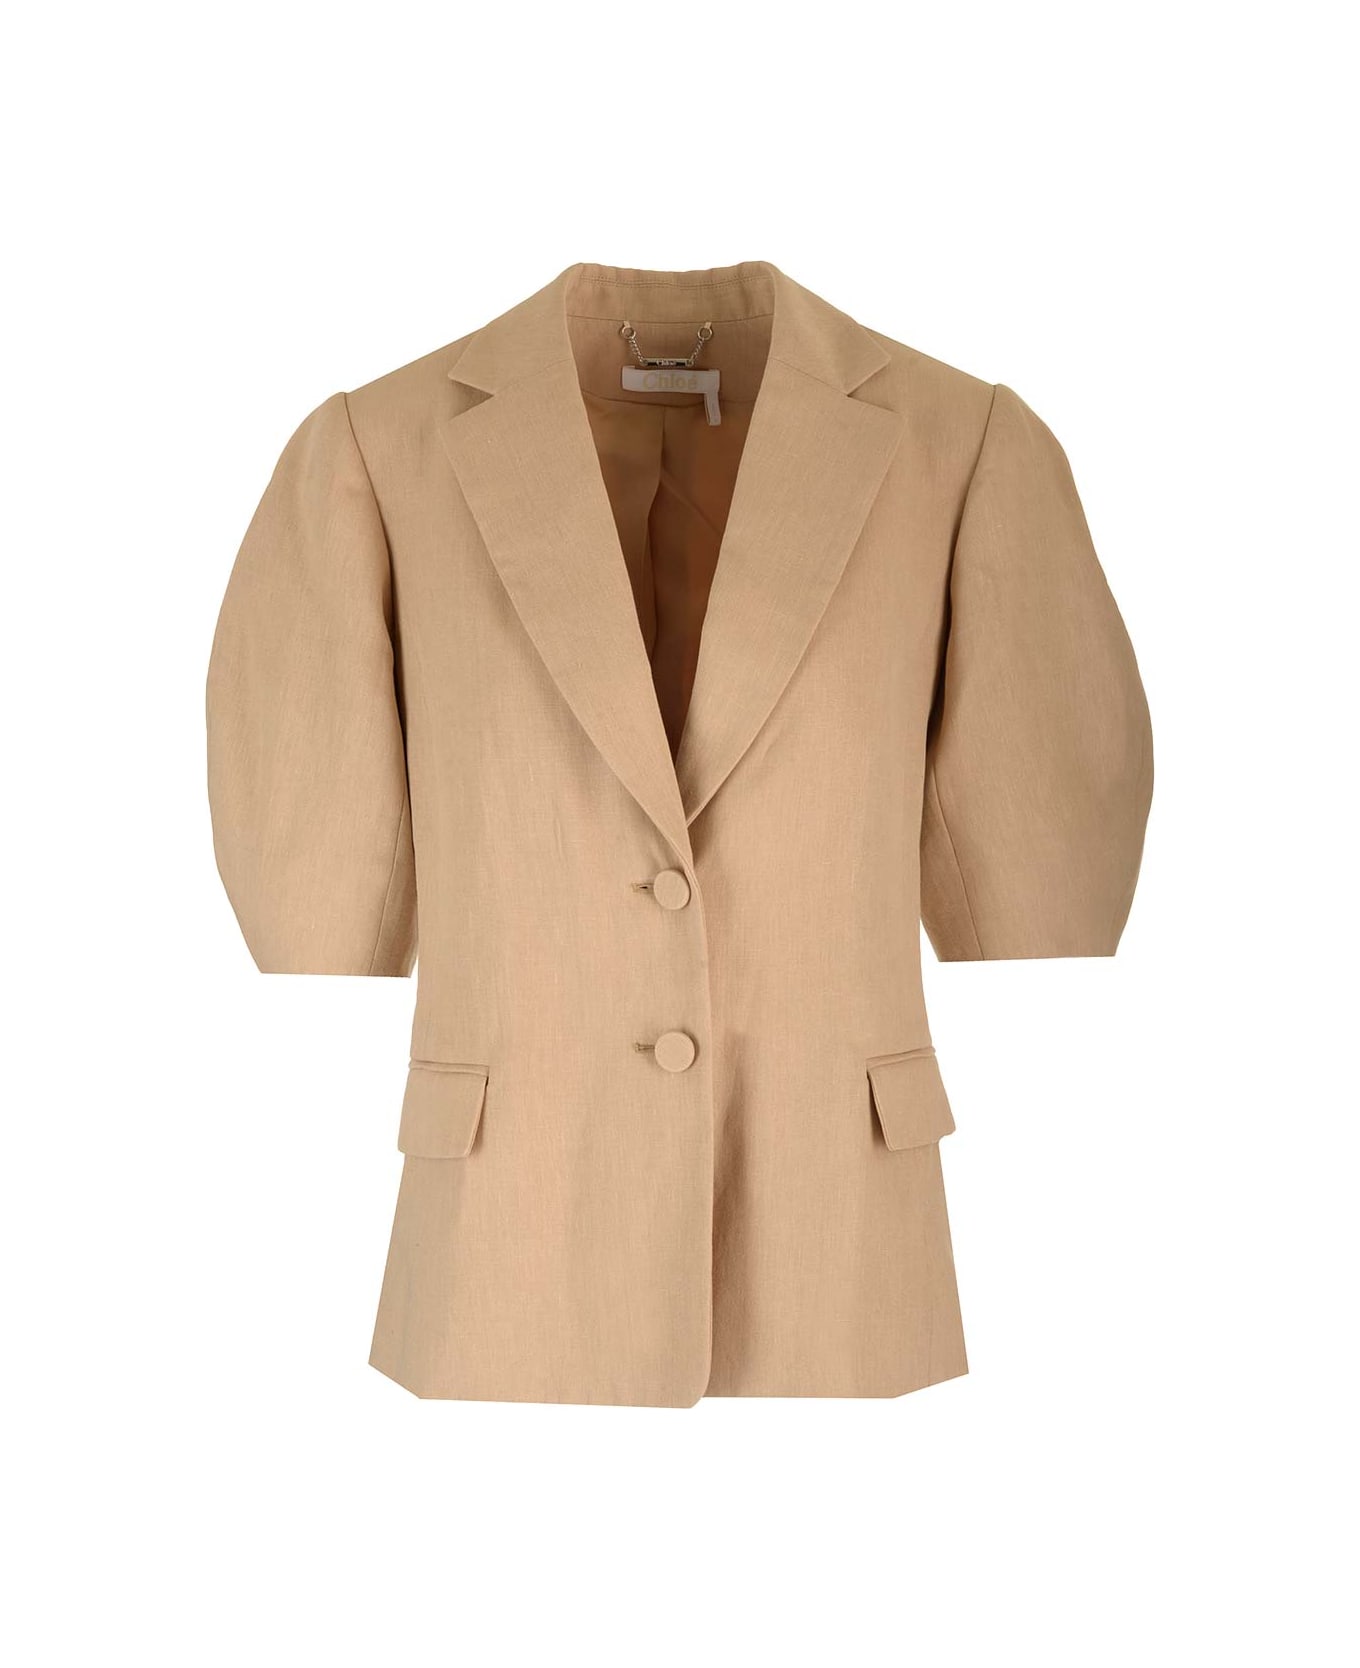 Chloé Single-breasted Jacket With Balloon Sleeves - Beige ブレザー